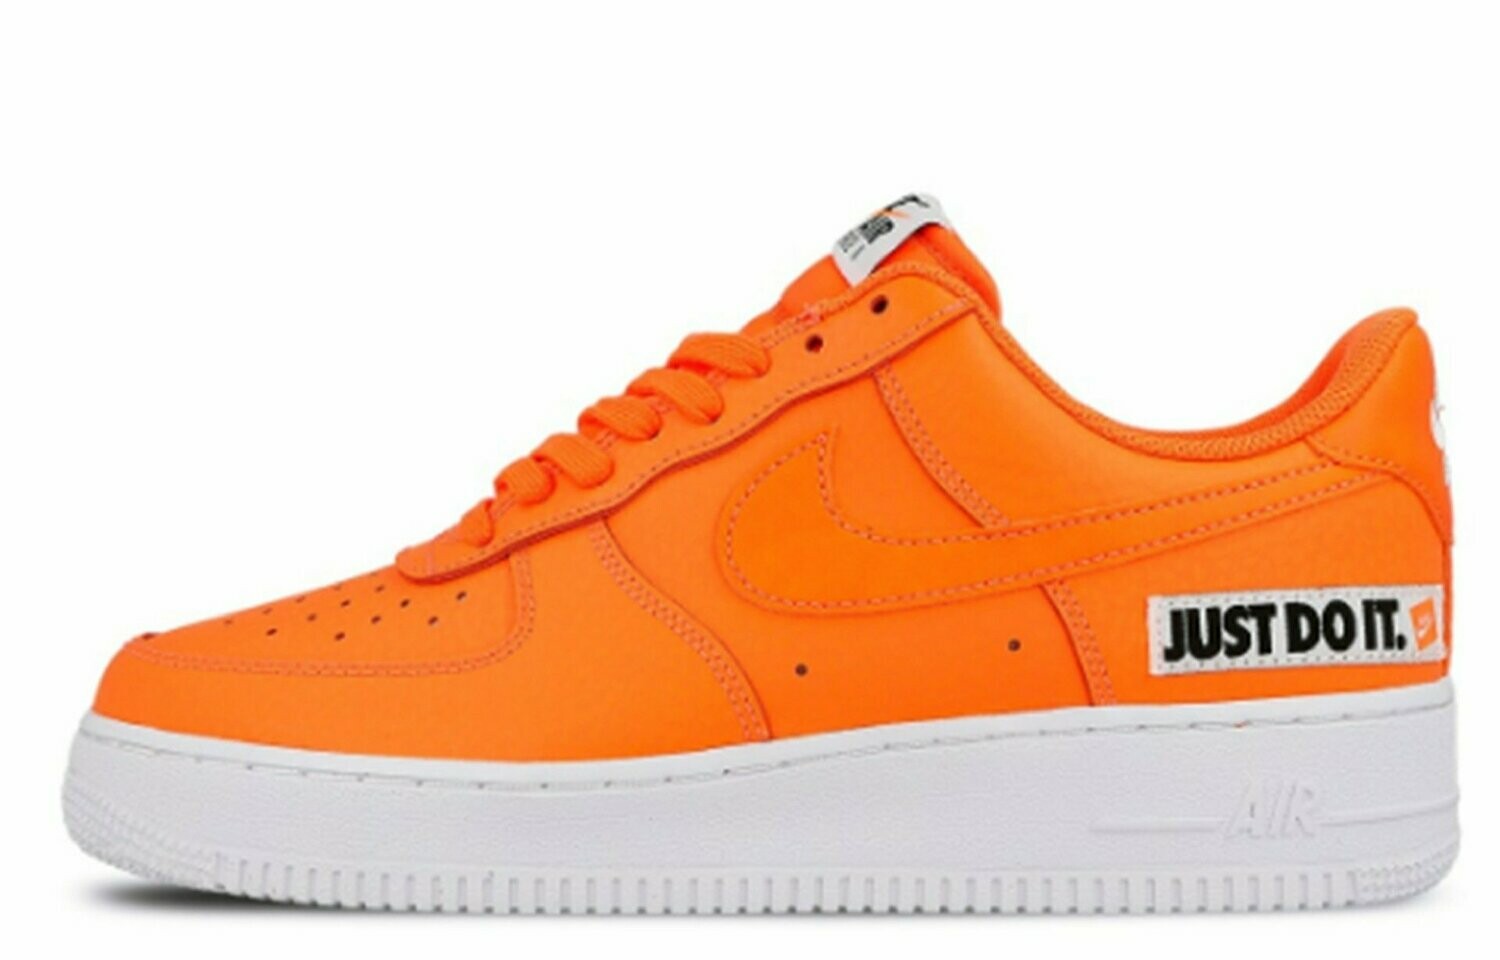 Air Force 1 Low '07 LV8 "Just Do It" (Orange)